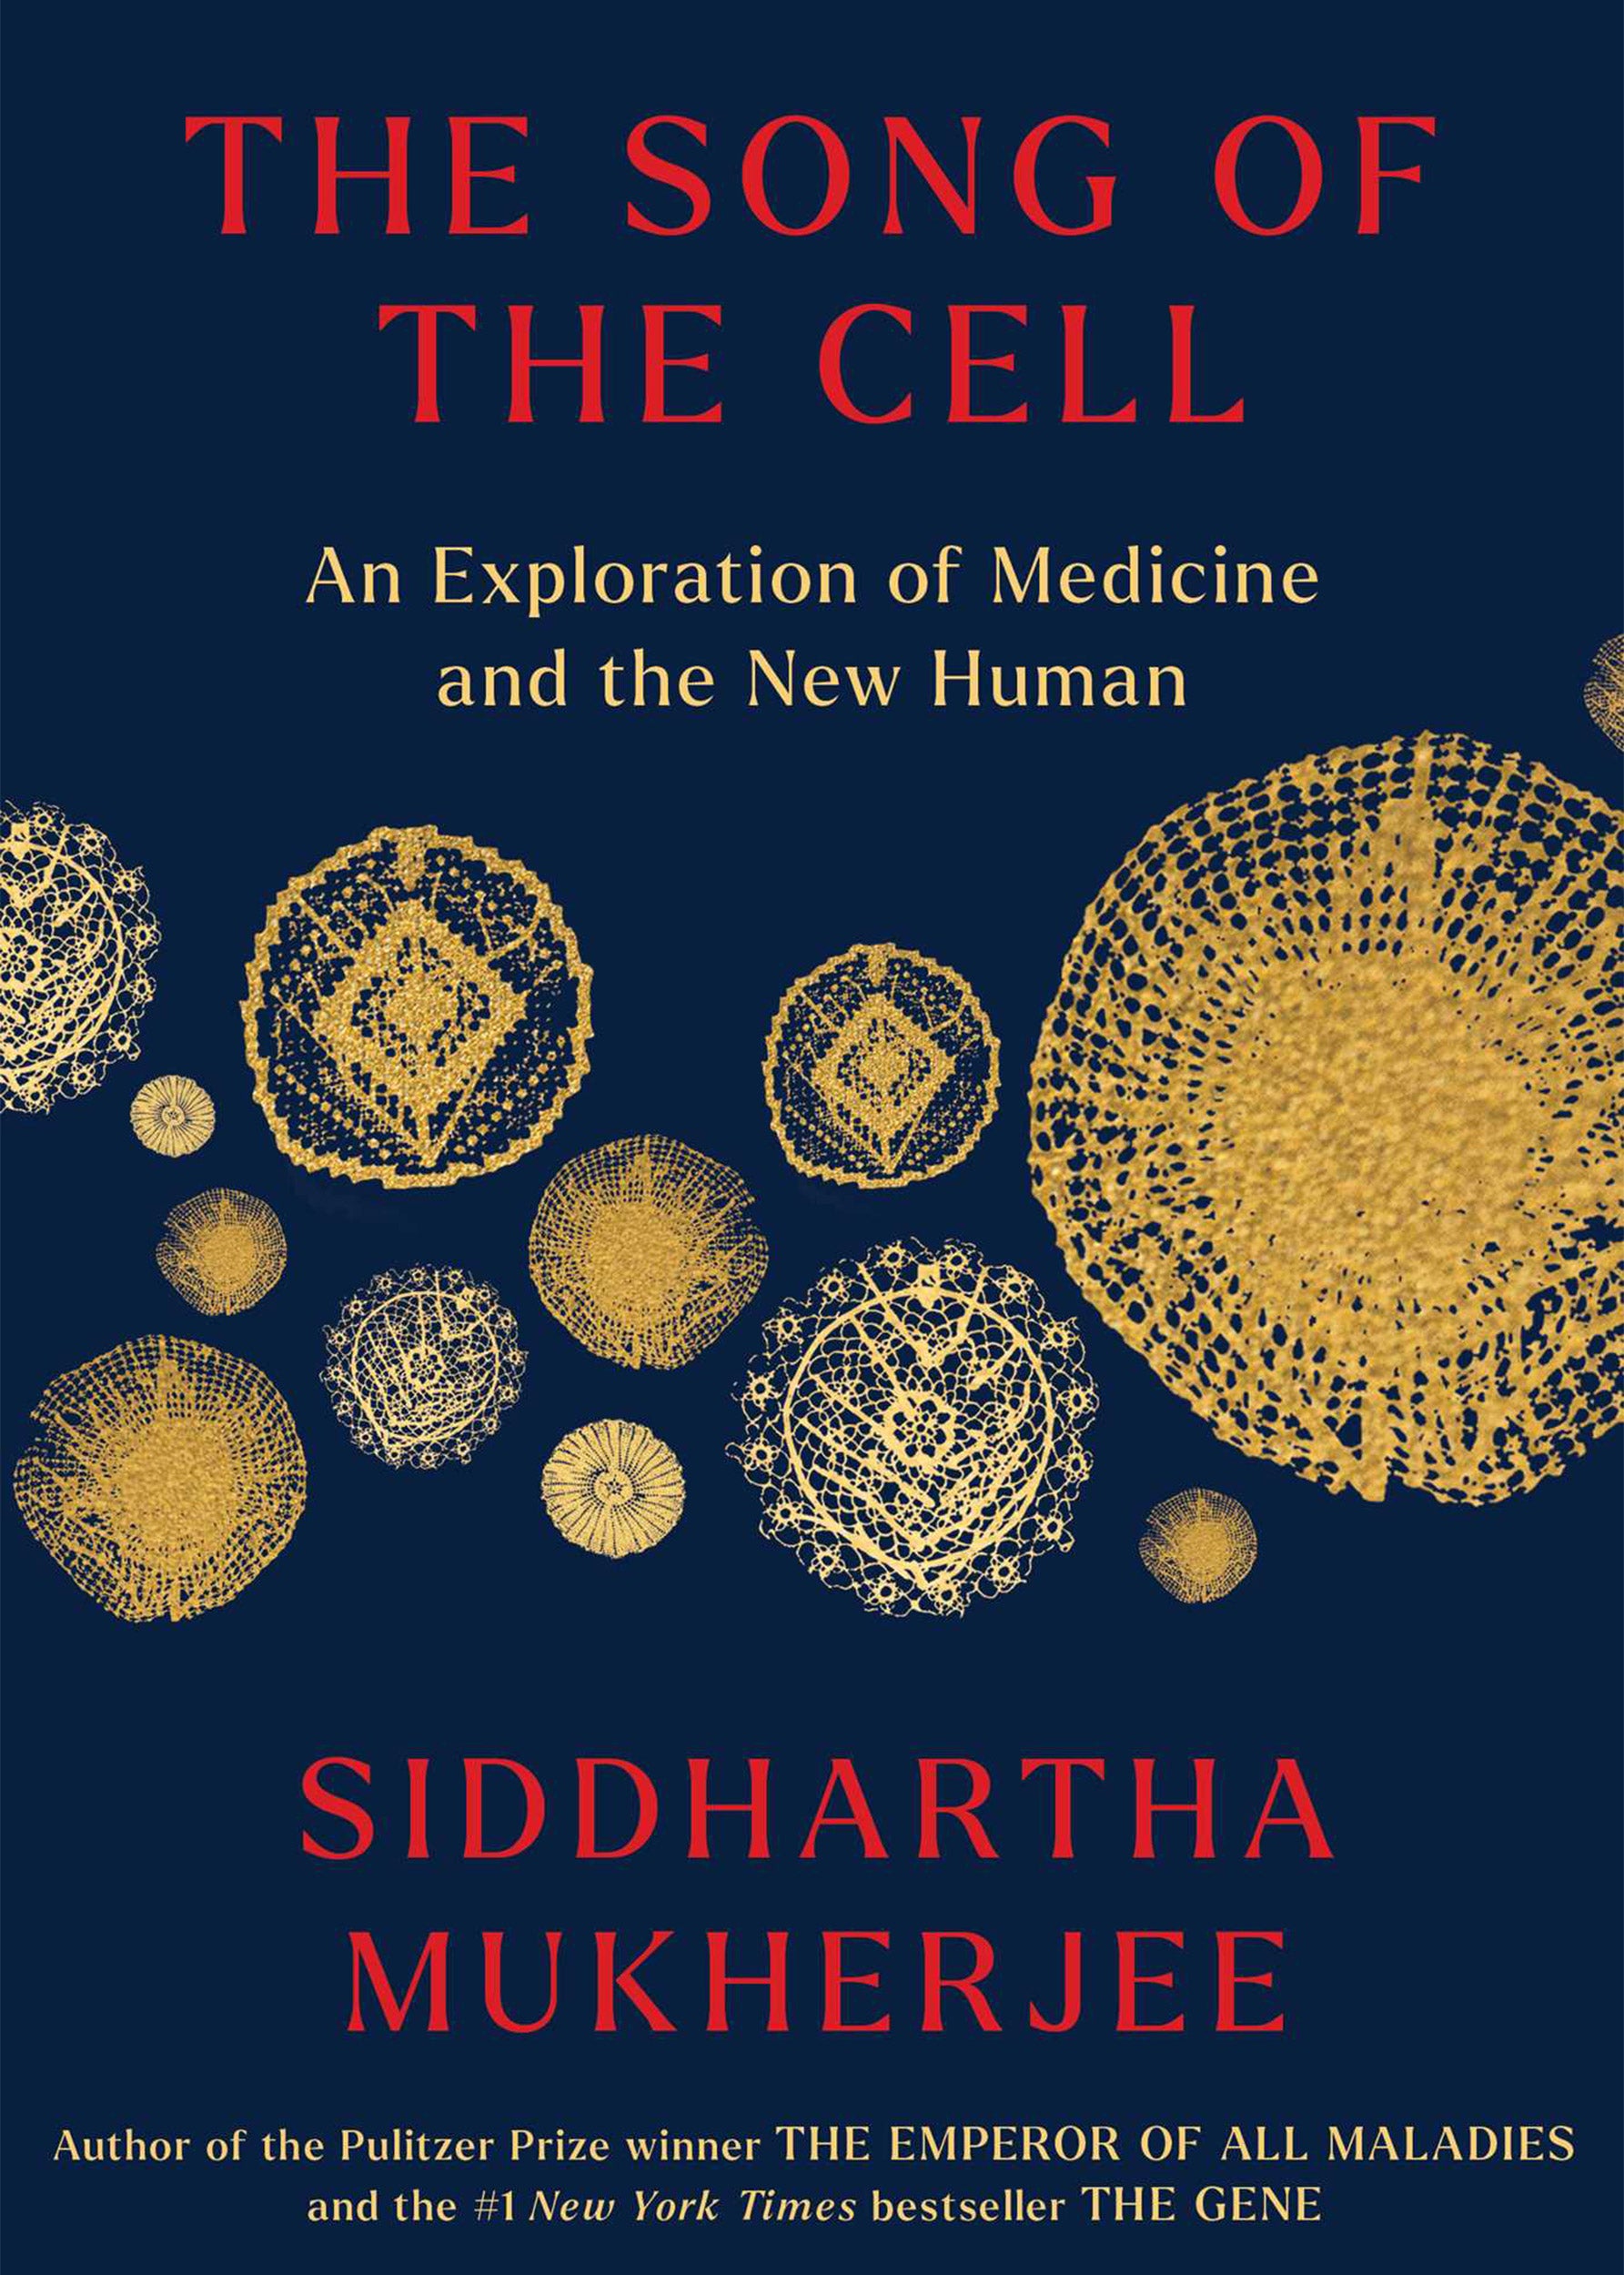 Excerpt from Siddhartha Mukherjee's 'The Song of the Cell